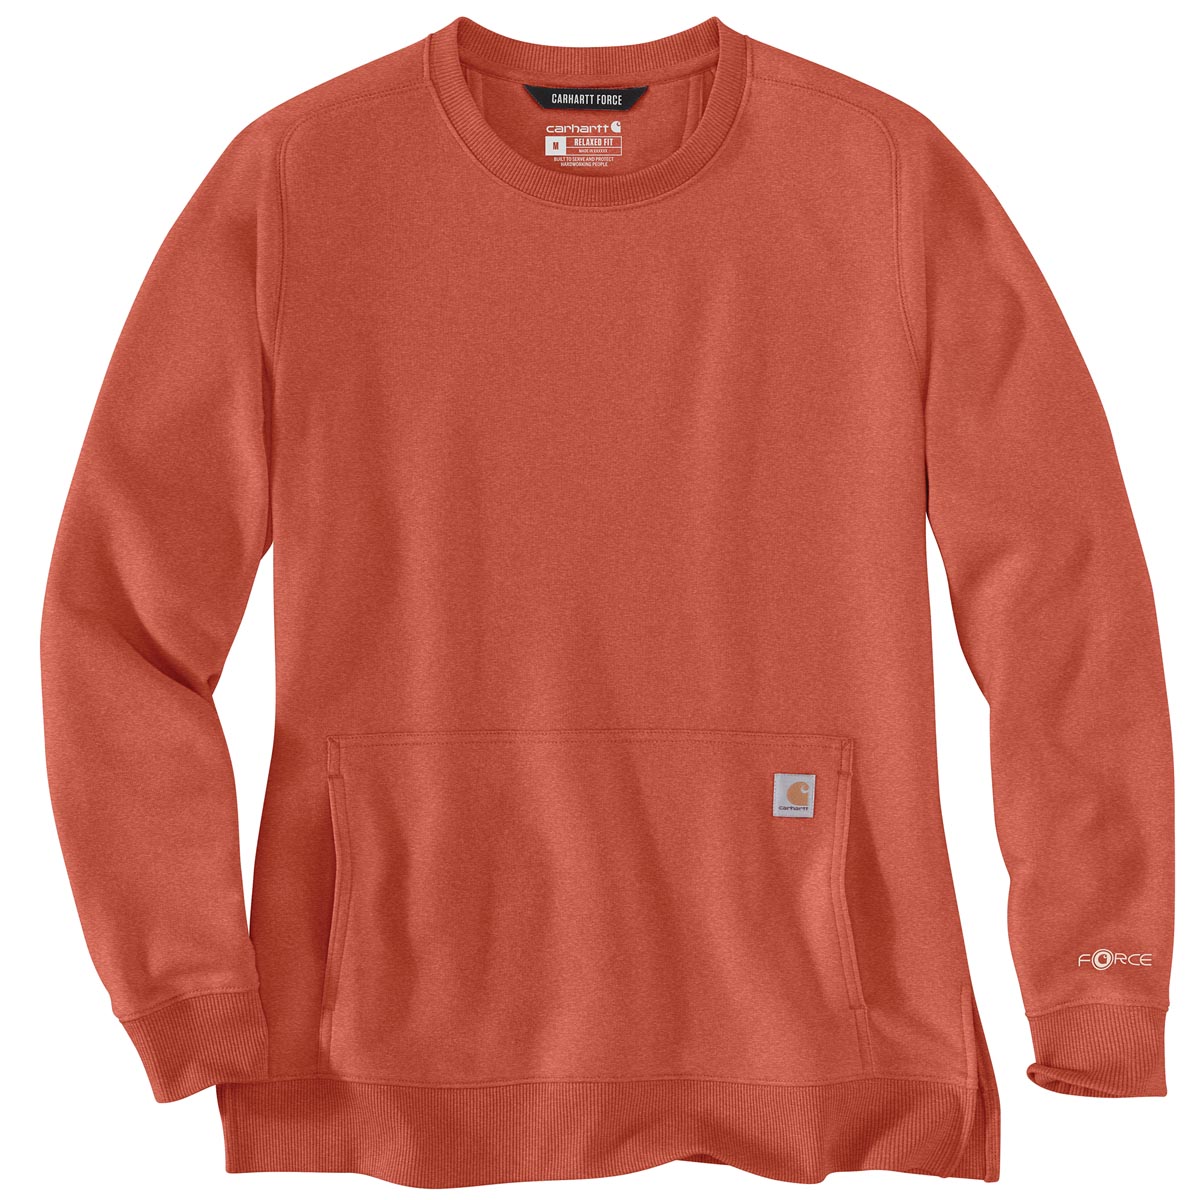 Carhartt Women's Force Relaxed Fit Lightweight Sweatshirt - Discontinued Pricing